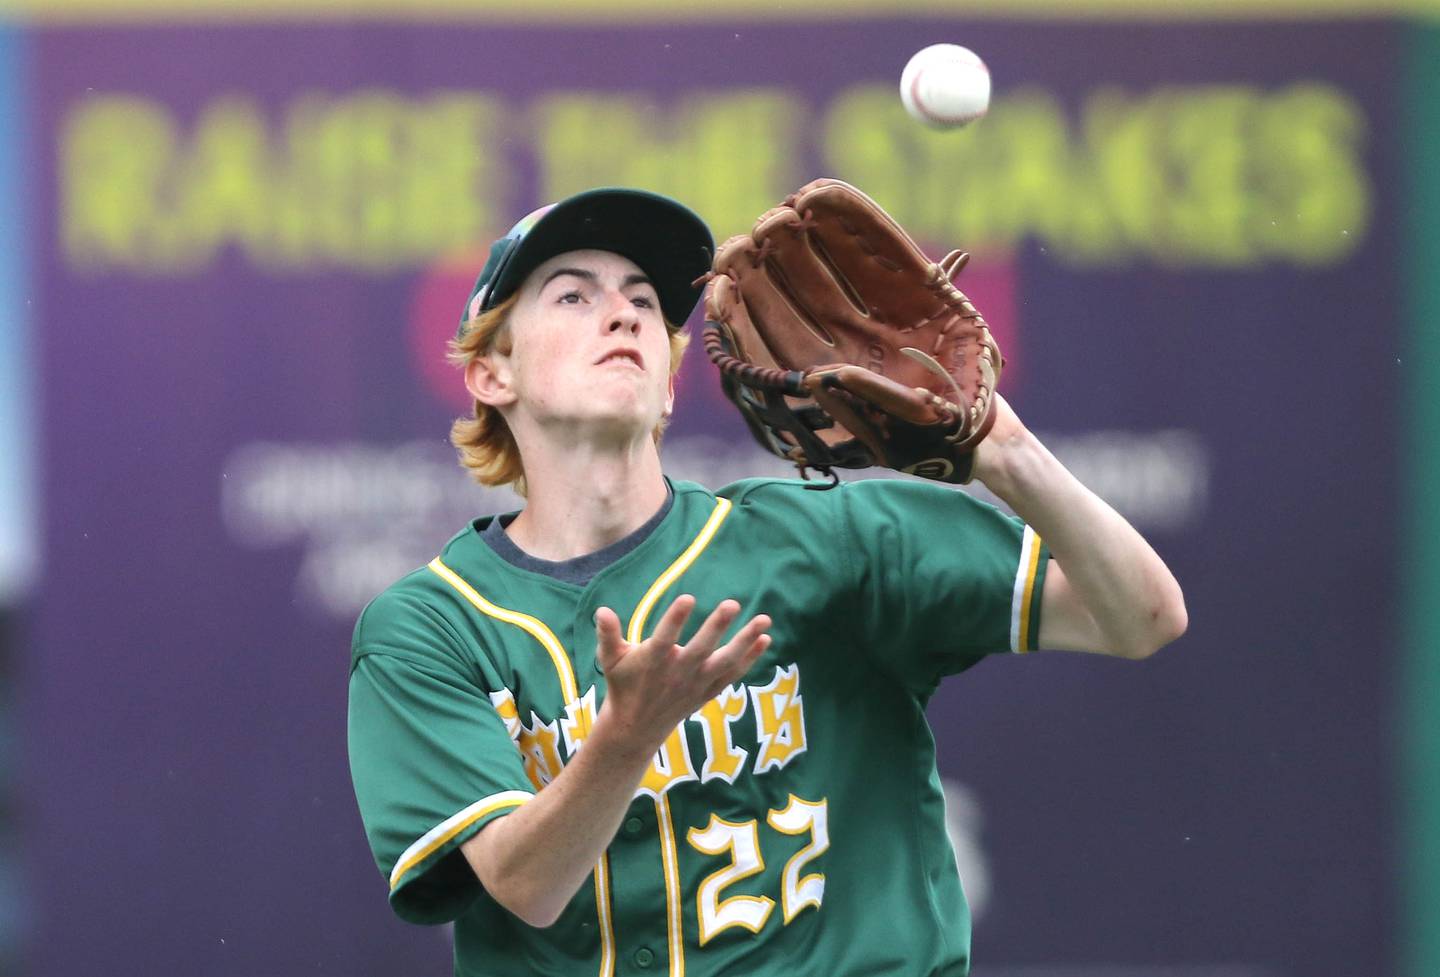 Crystal Lake South's Joey Weldon catches a fly ball Friday, June 10, 2022, during their IHSA Class 3A state semifinal game against Nazareth at Duly Health and Care Field in Joliet.